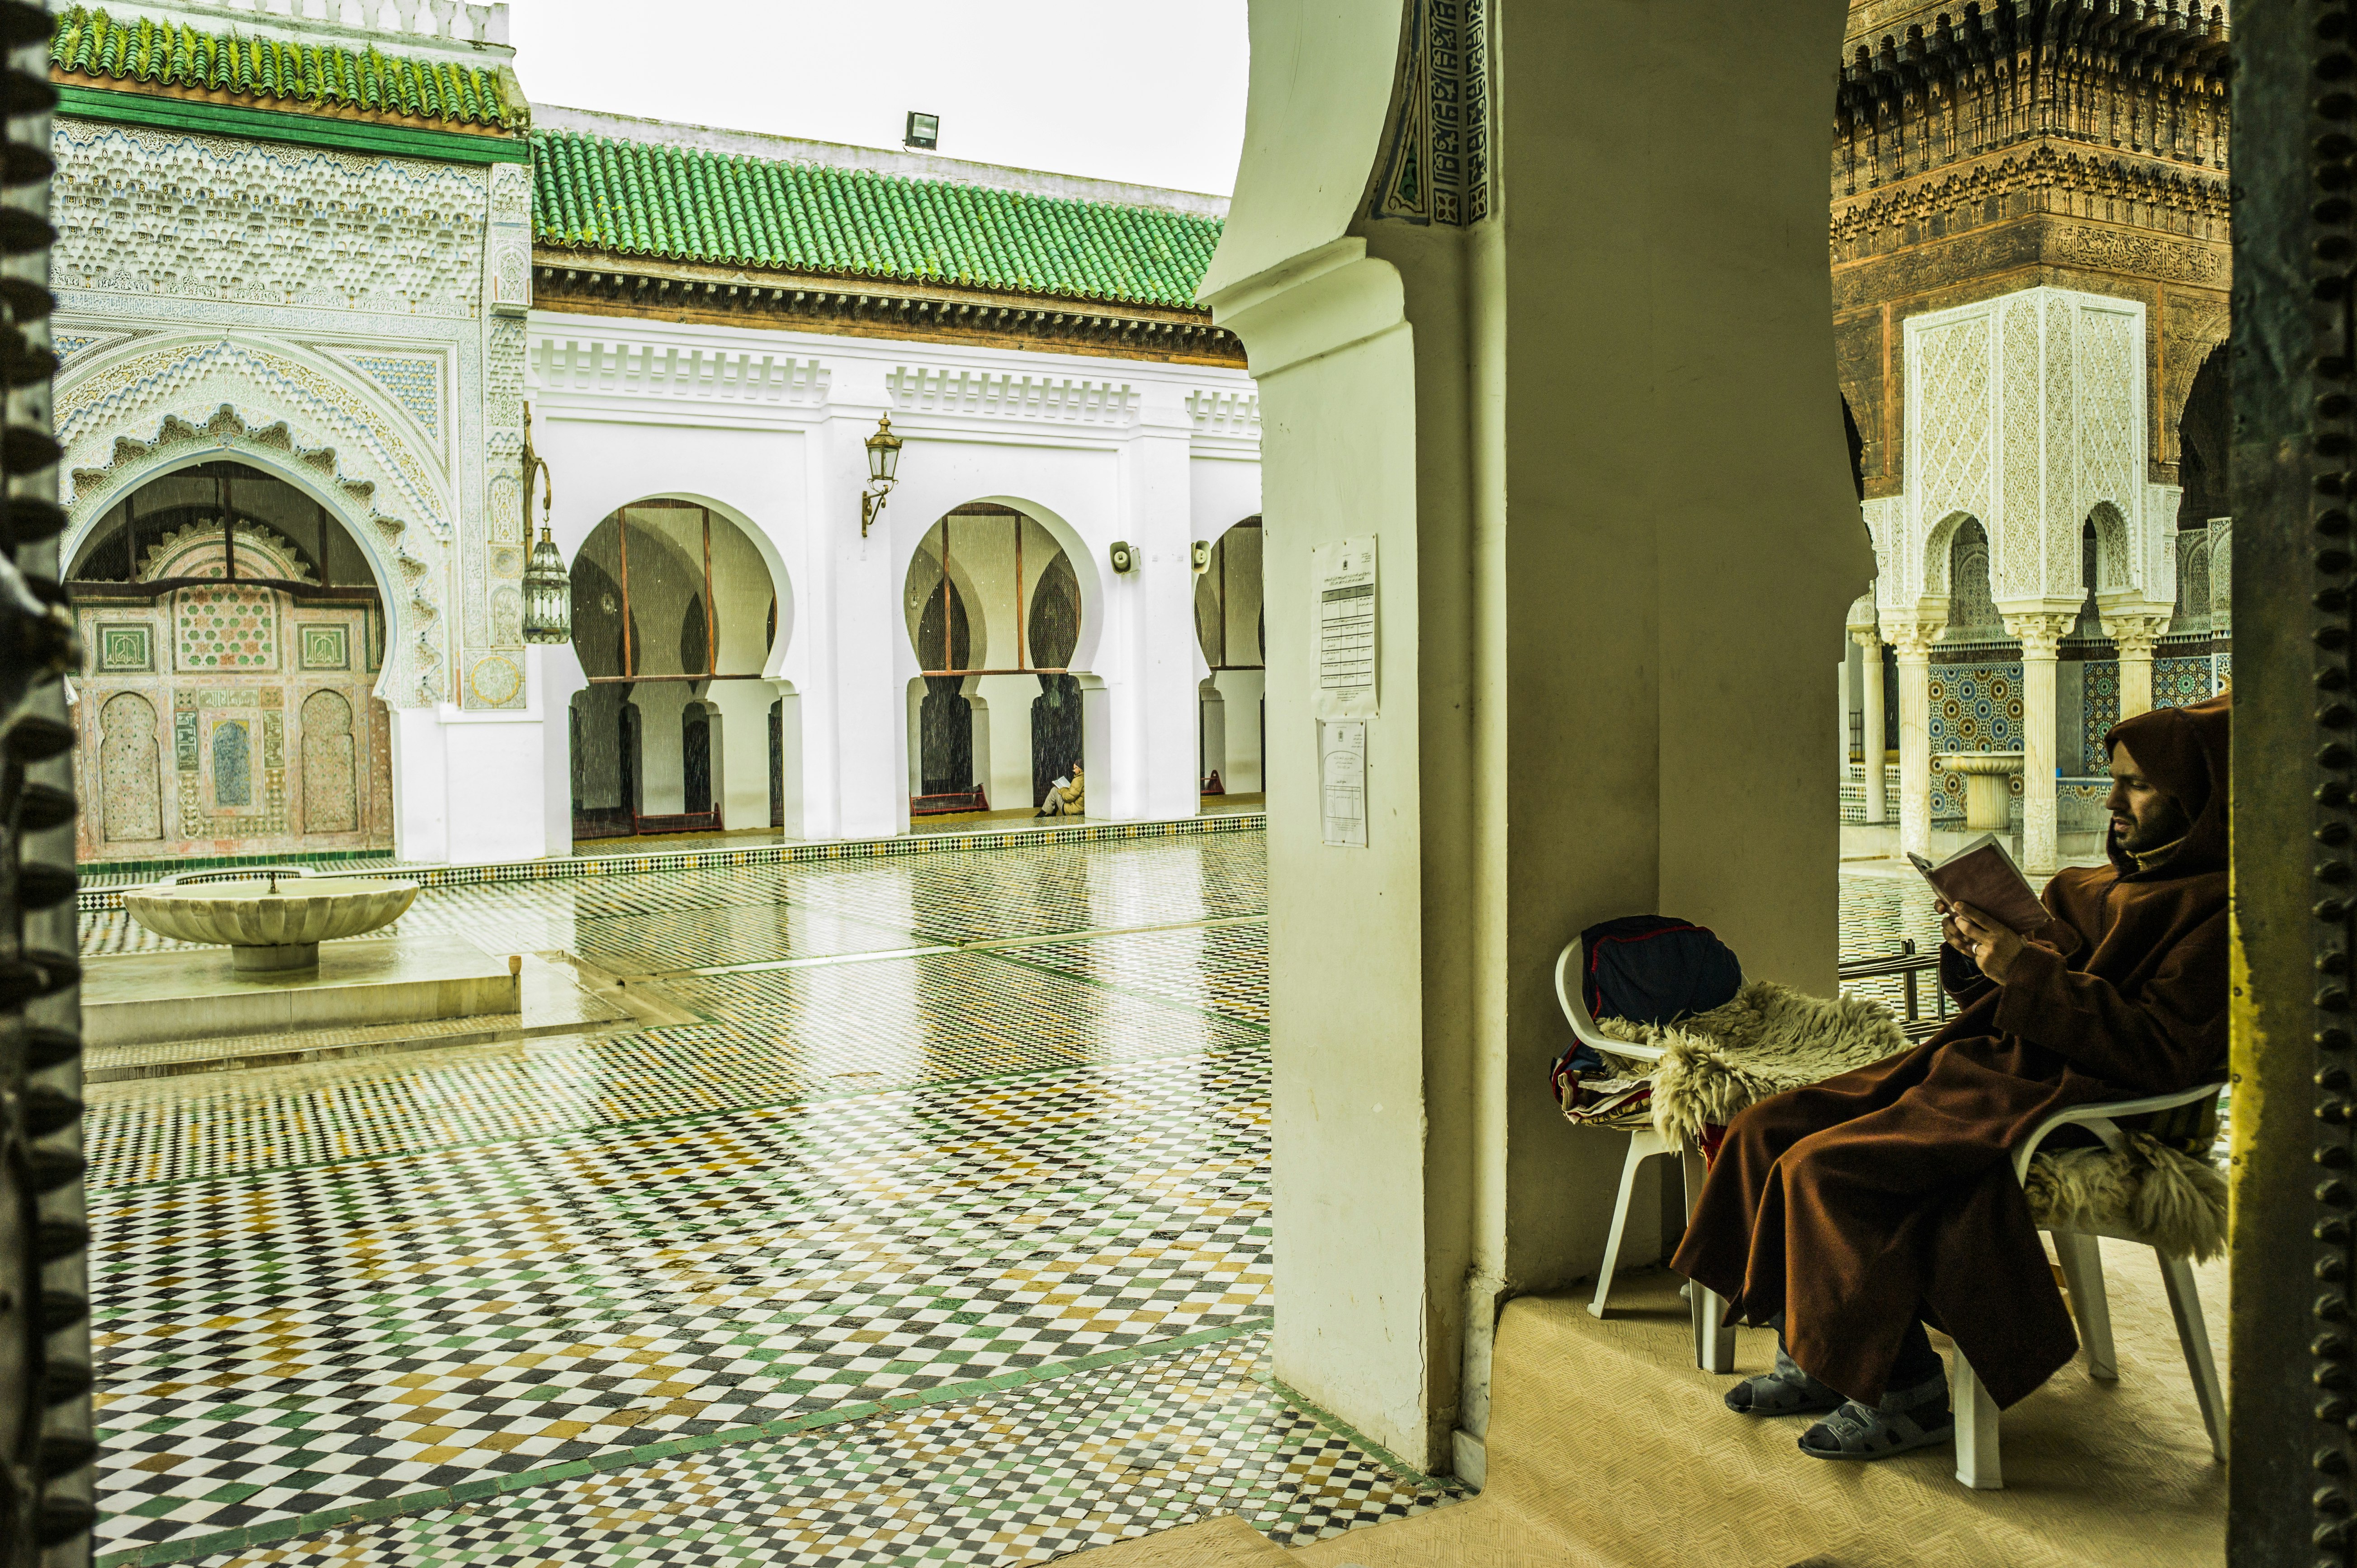 A man in brown robes reads a book tucked away in the ornate halls of the Kairaouine Mosque in Fes, where the floors are made up of gleaming mosaics, white arched walls and columns, and green tile roofs 